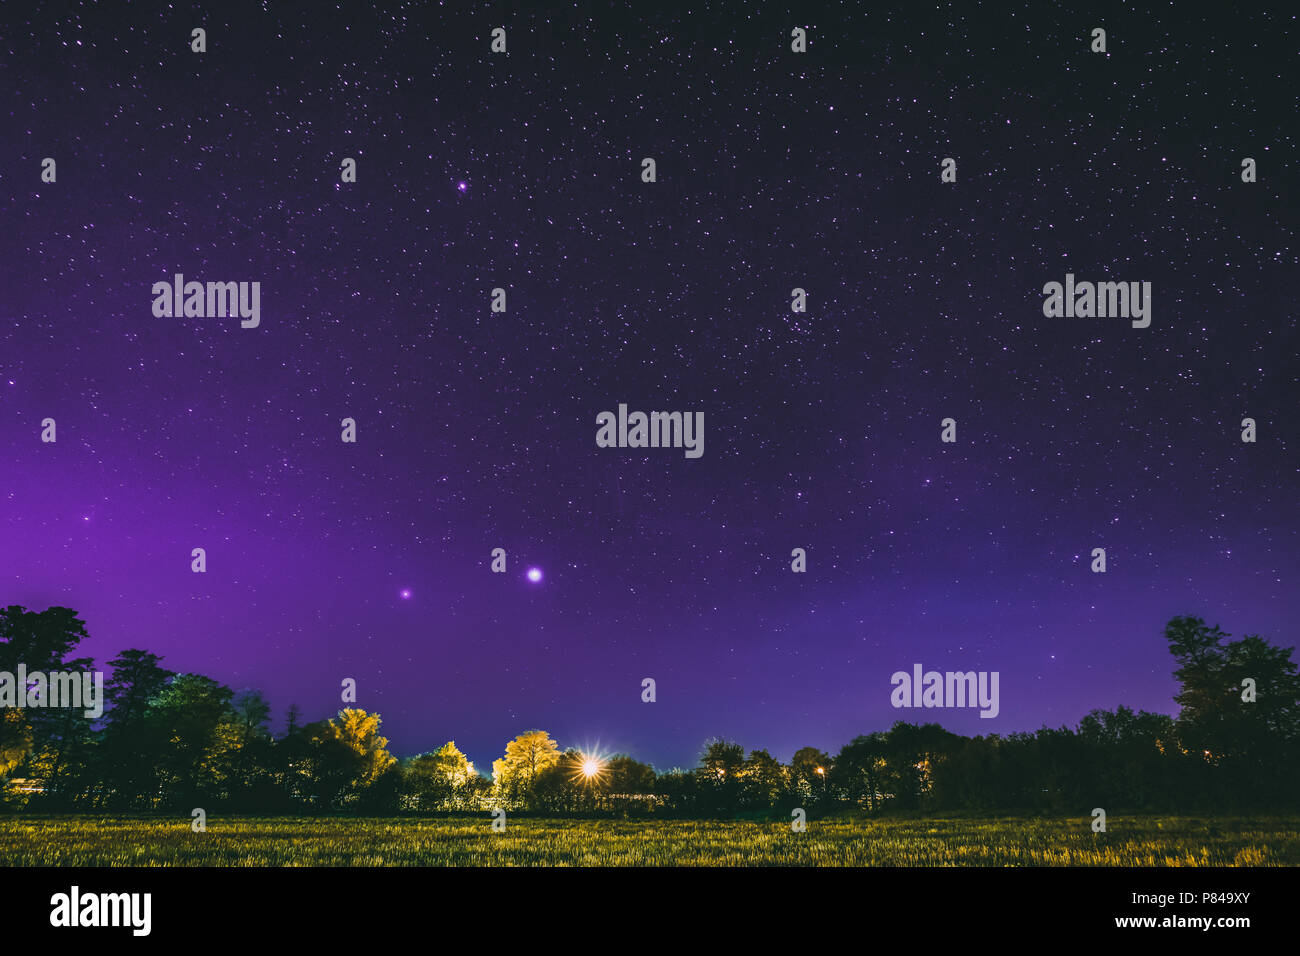 Green Trees Woods In Park Under Purple Magenta Night Starry Sky. Night Landscape With Glowing Stars Over Forest, Meadow At Summer Season. Stock Photo